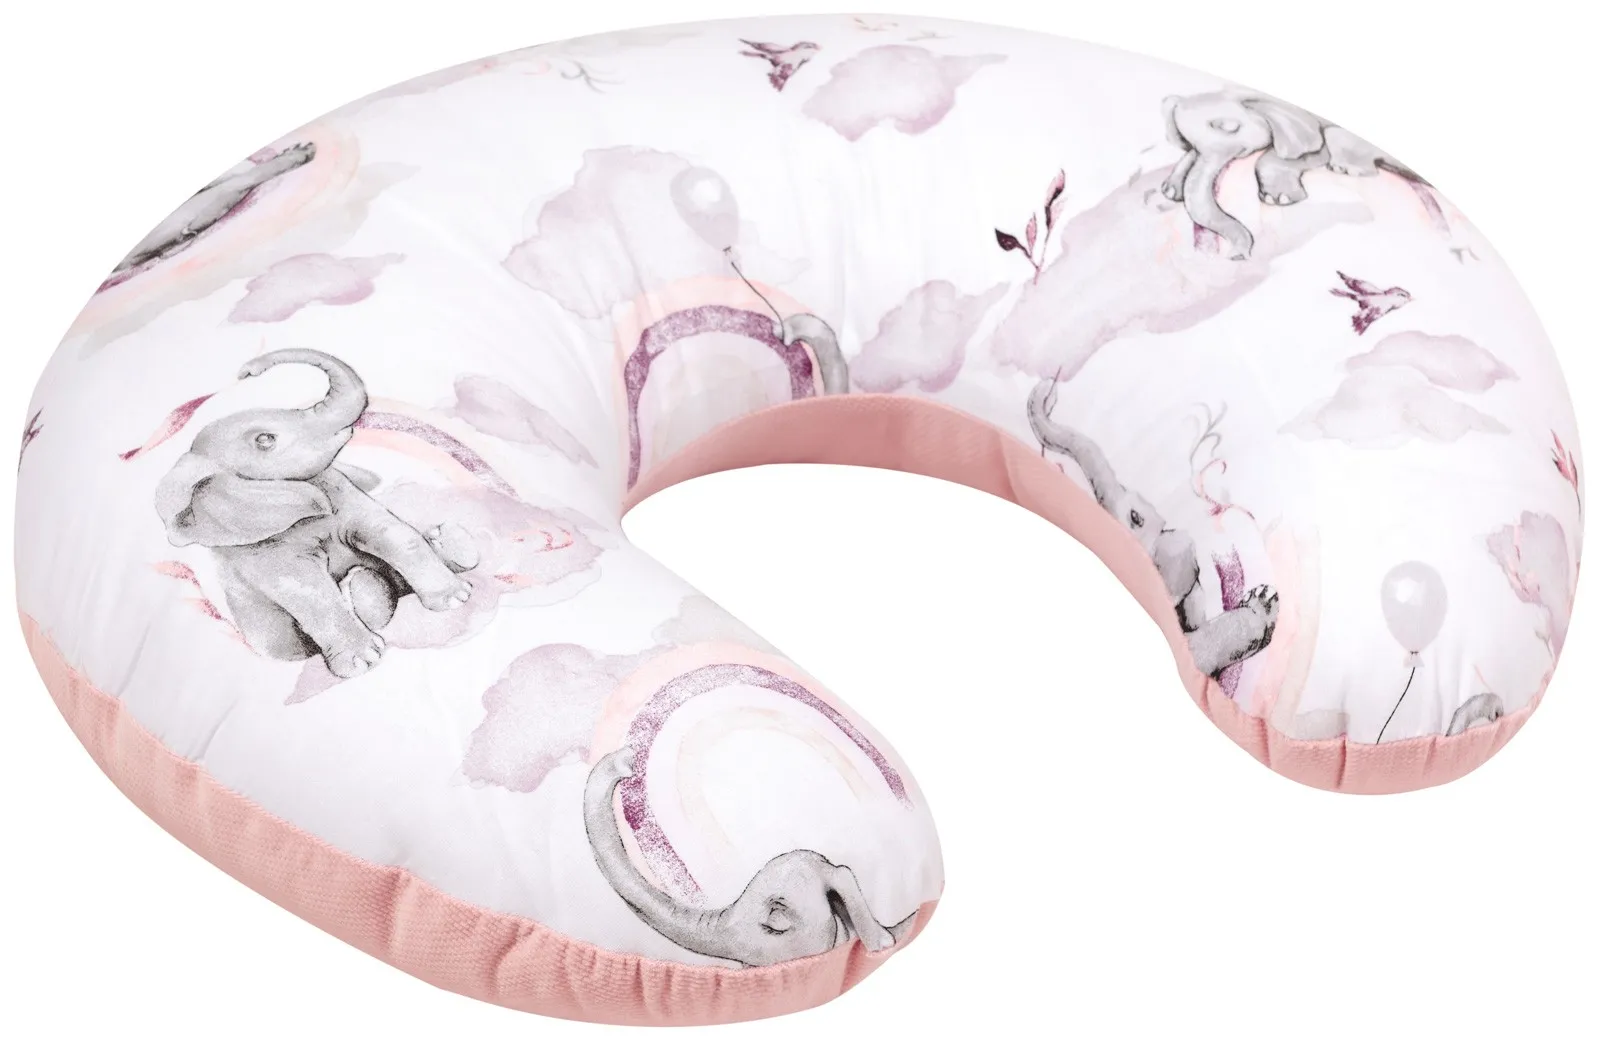 Nursing feeding pillow 60×40 cm Habarigani with removable cover